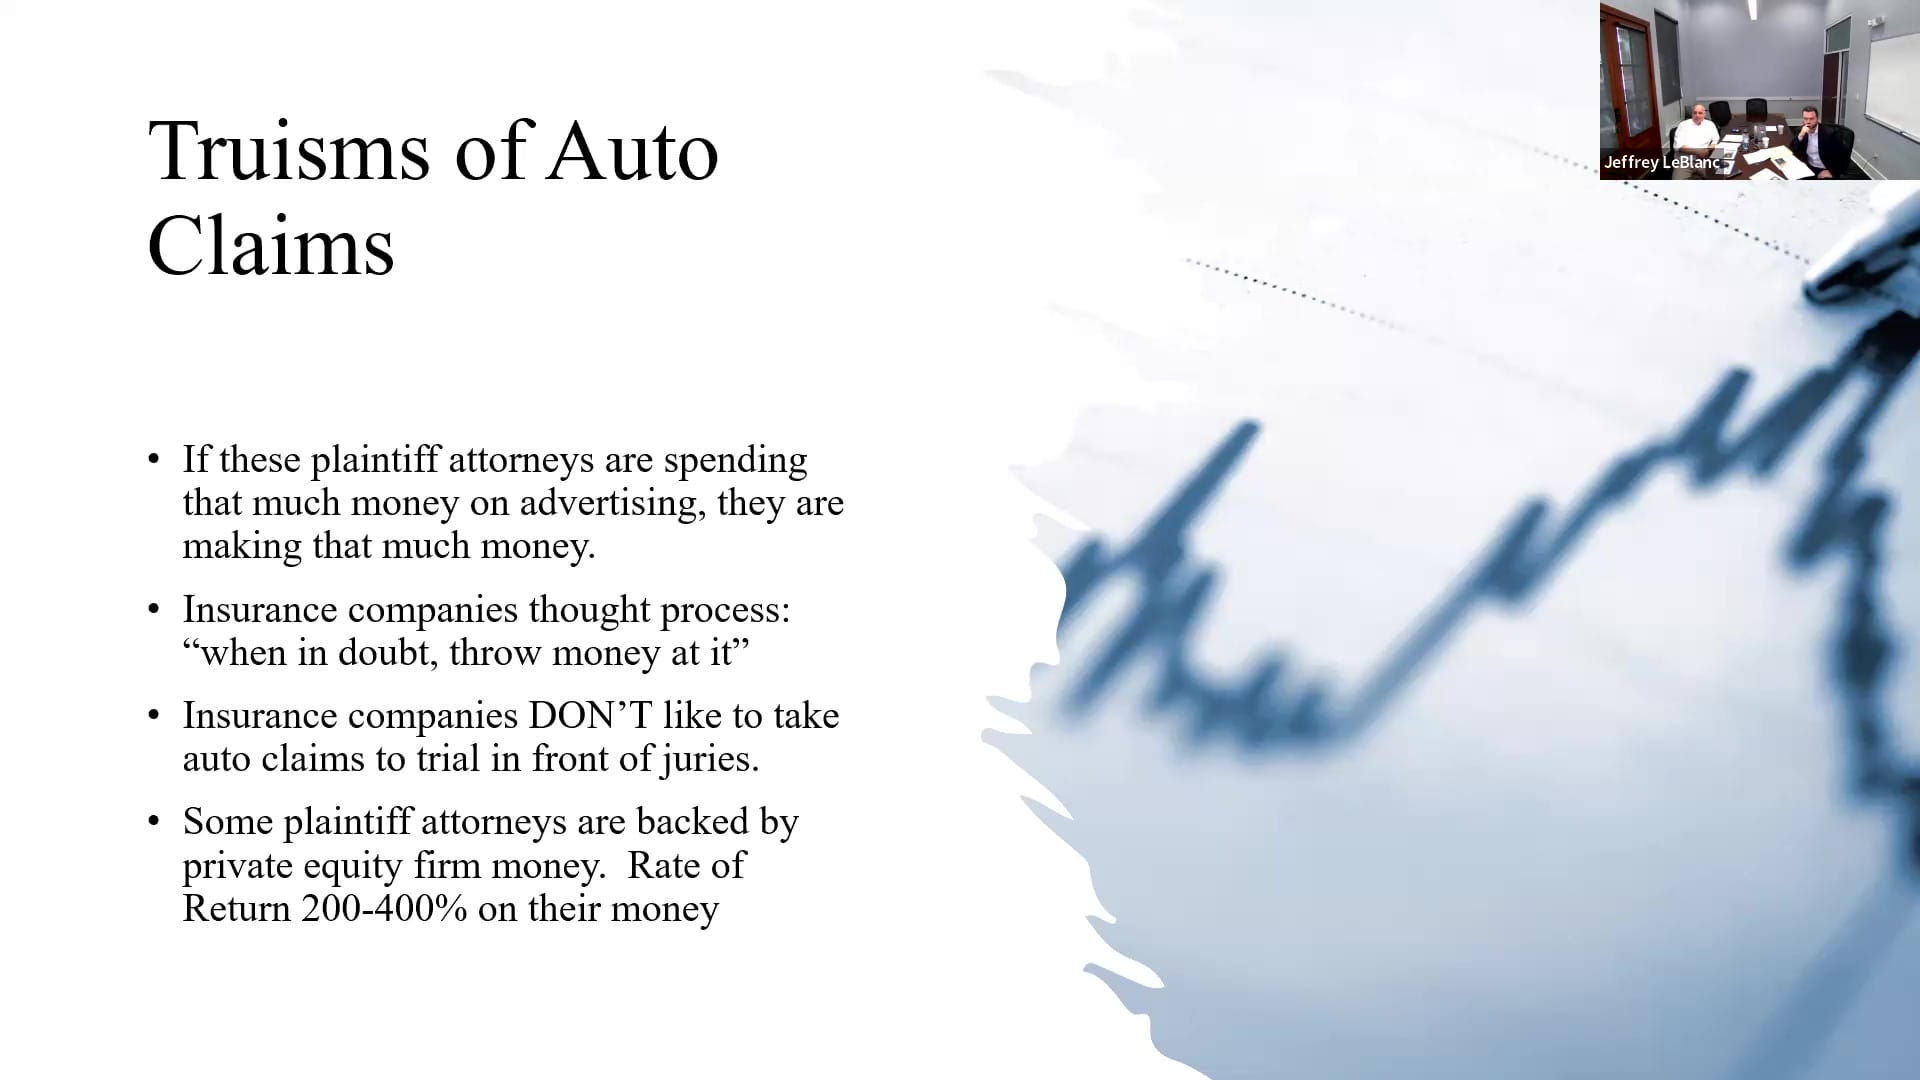 Truisms of Auto Claims